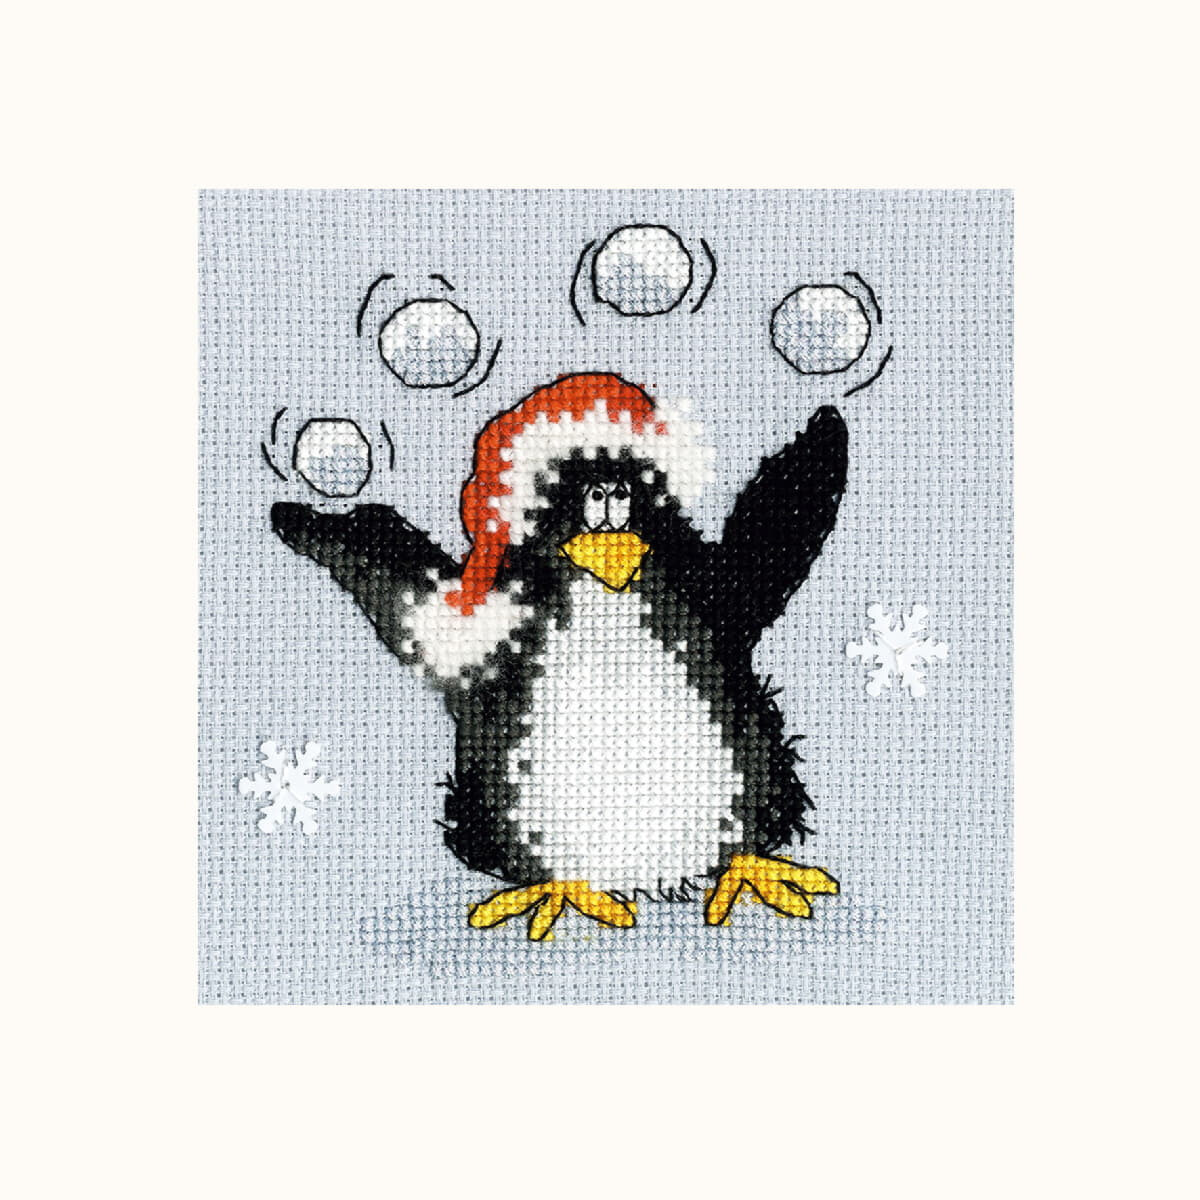 An embroidered picture of a cheerful penguin wearing a...